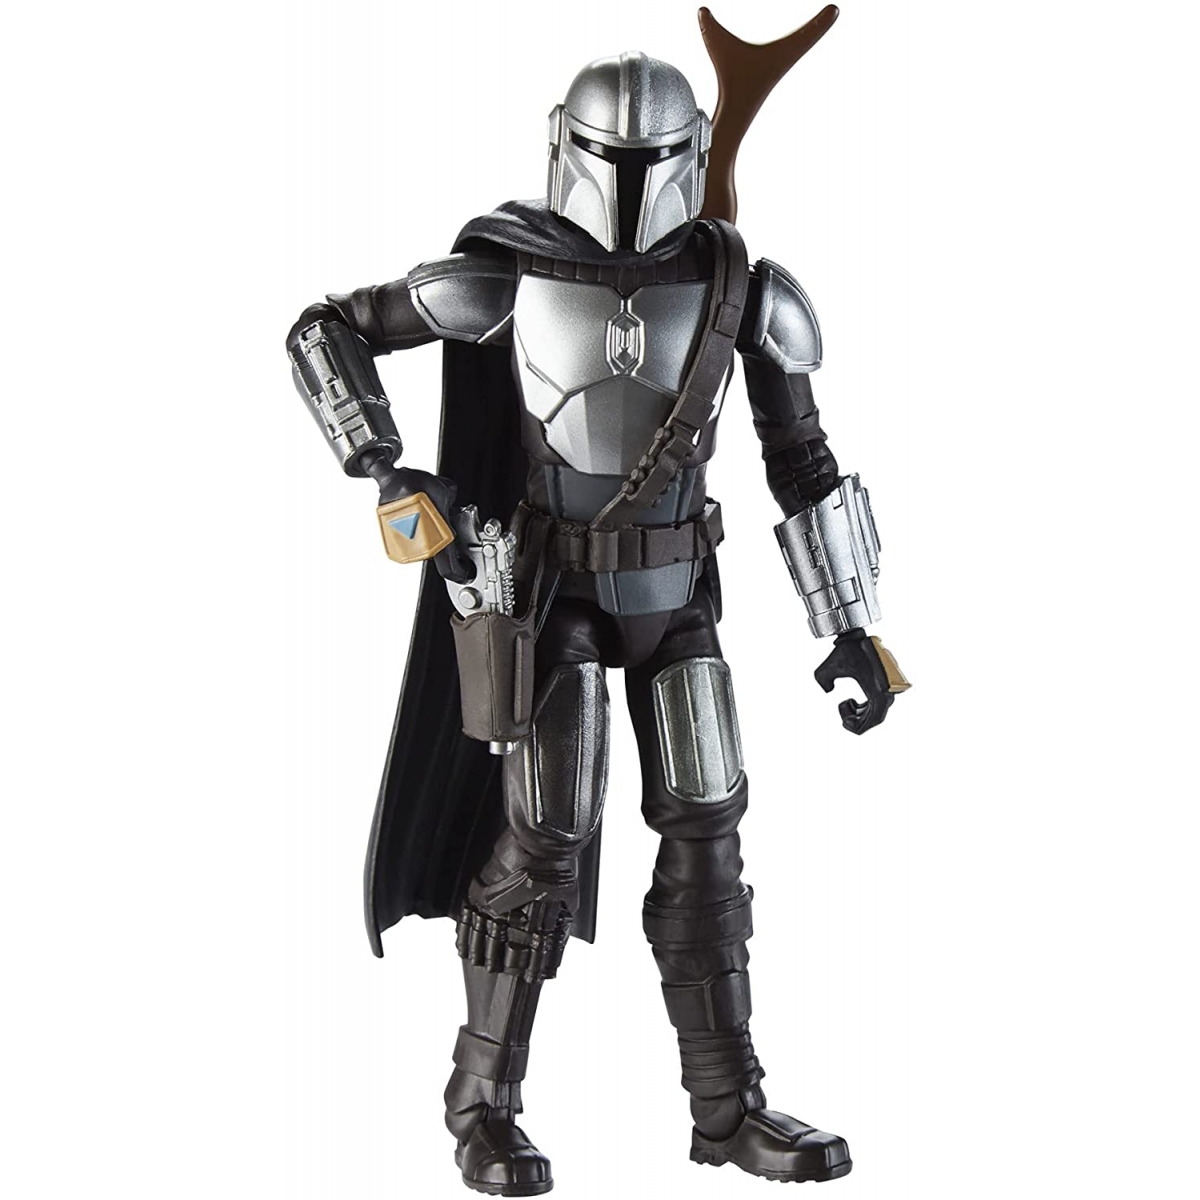 Star Wars Galaxy of Adventures The Mandalorian 5-Inch-Scale Figure 